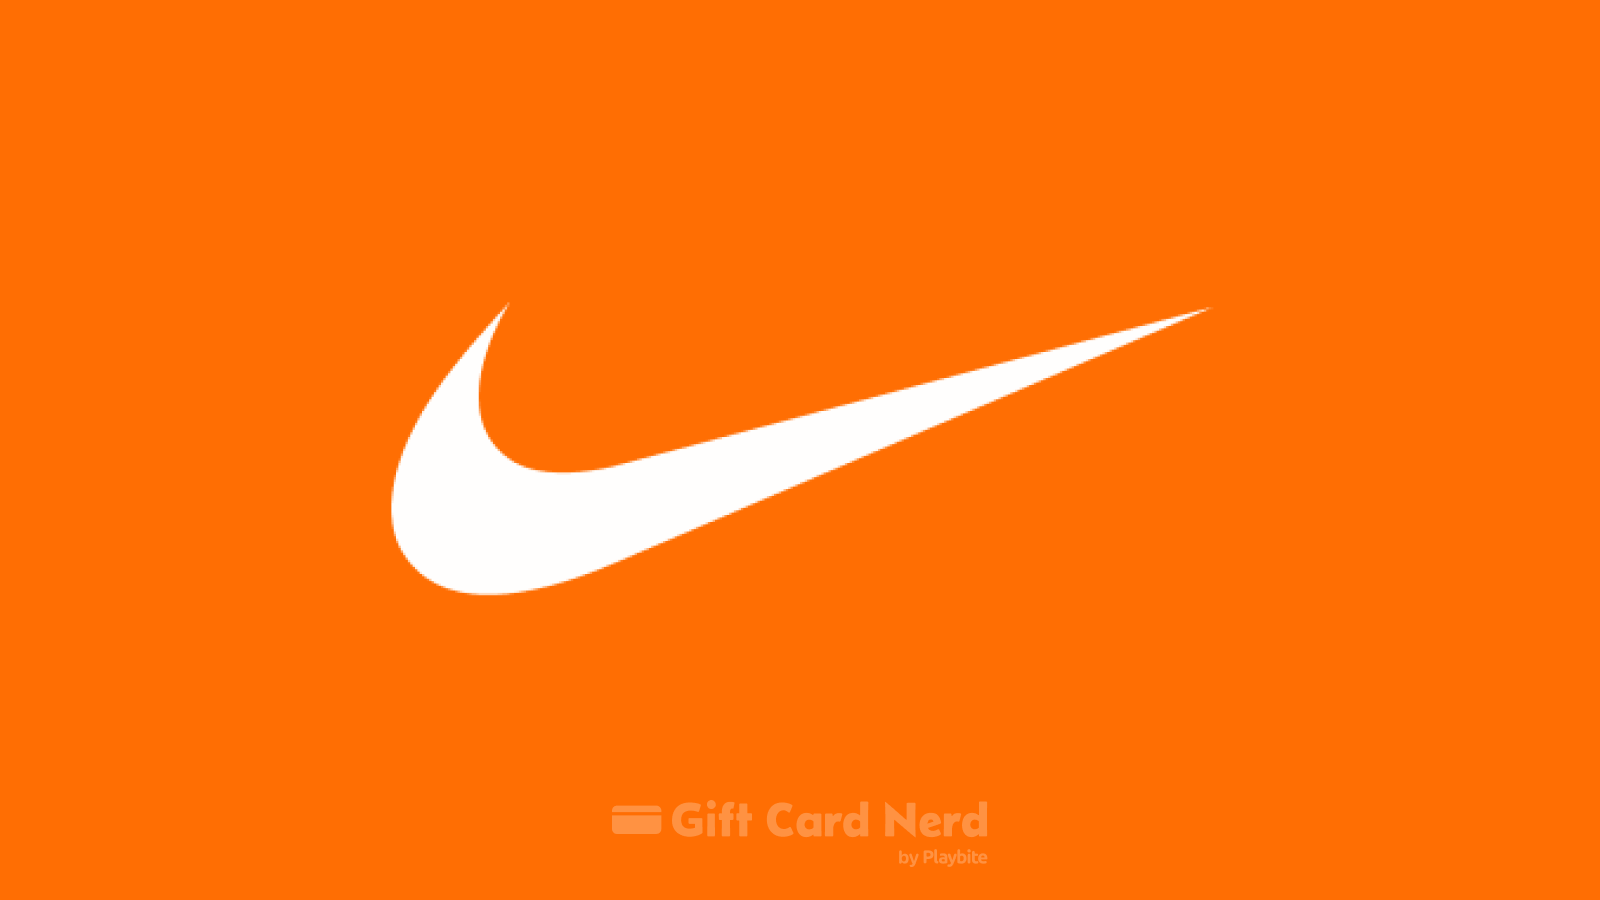 Does Walmart Sell Nike Gift Cards?